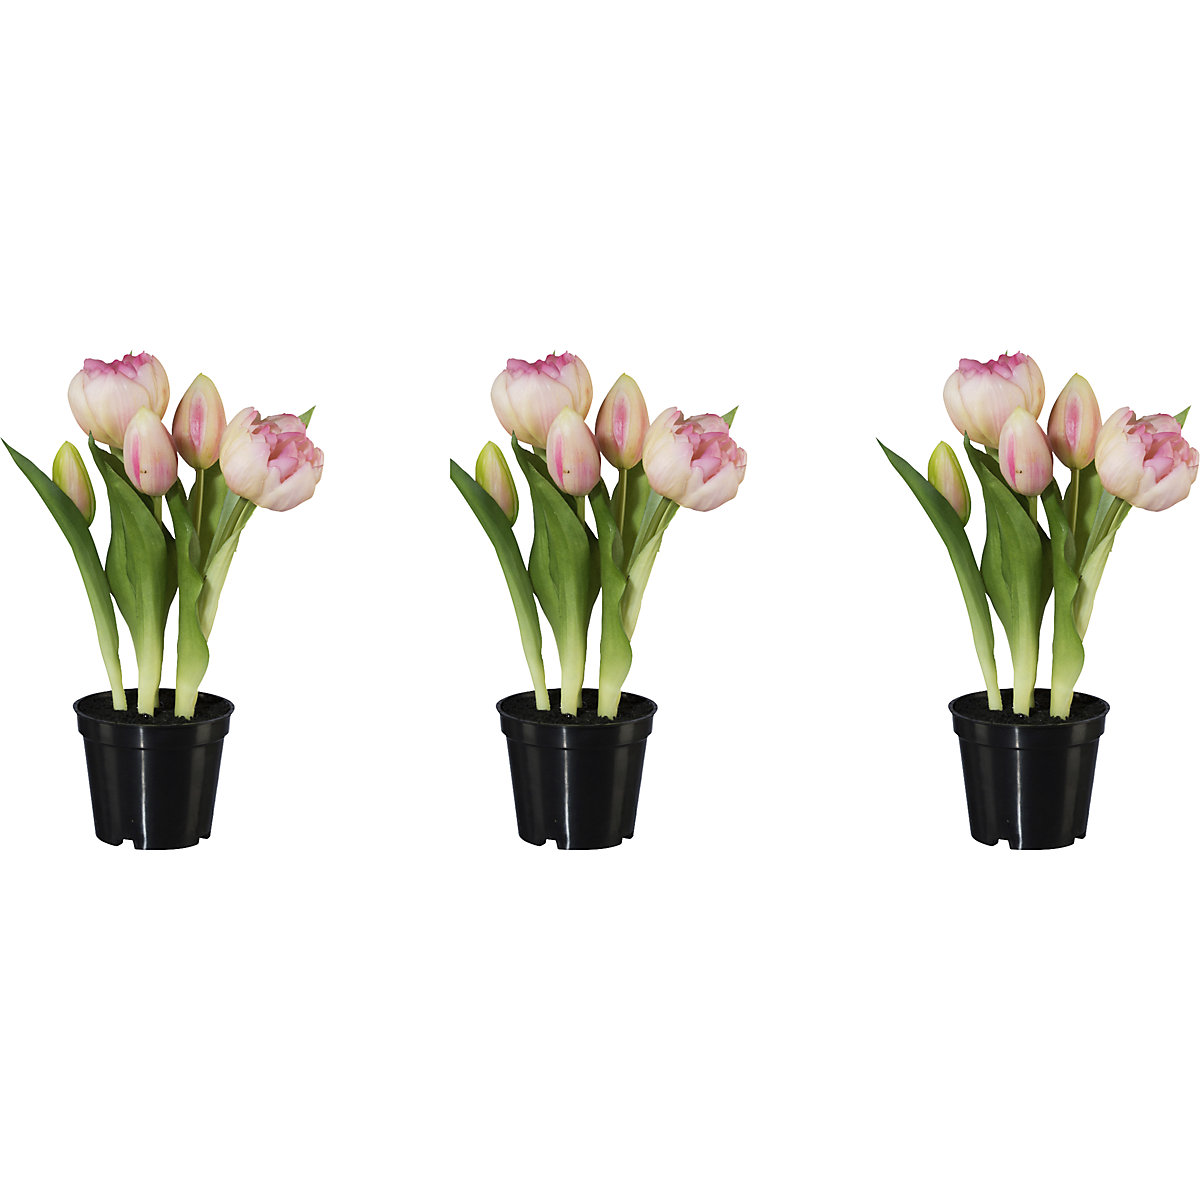 Filled tulips, real touch, in a pot